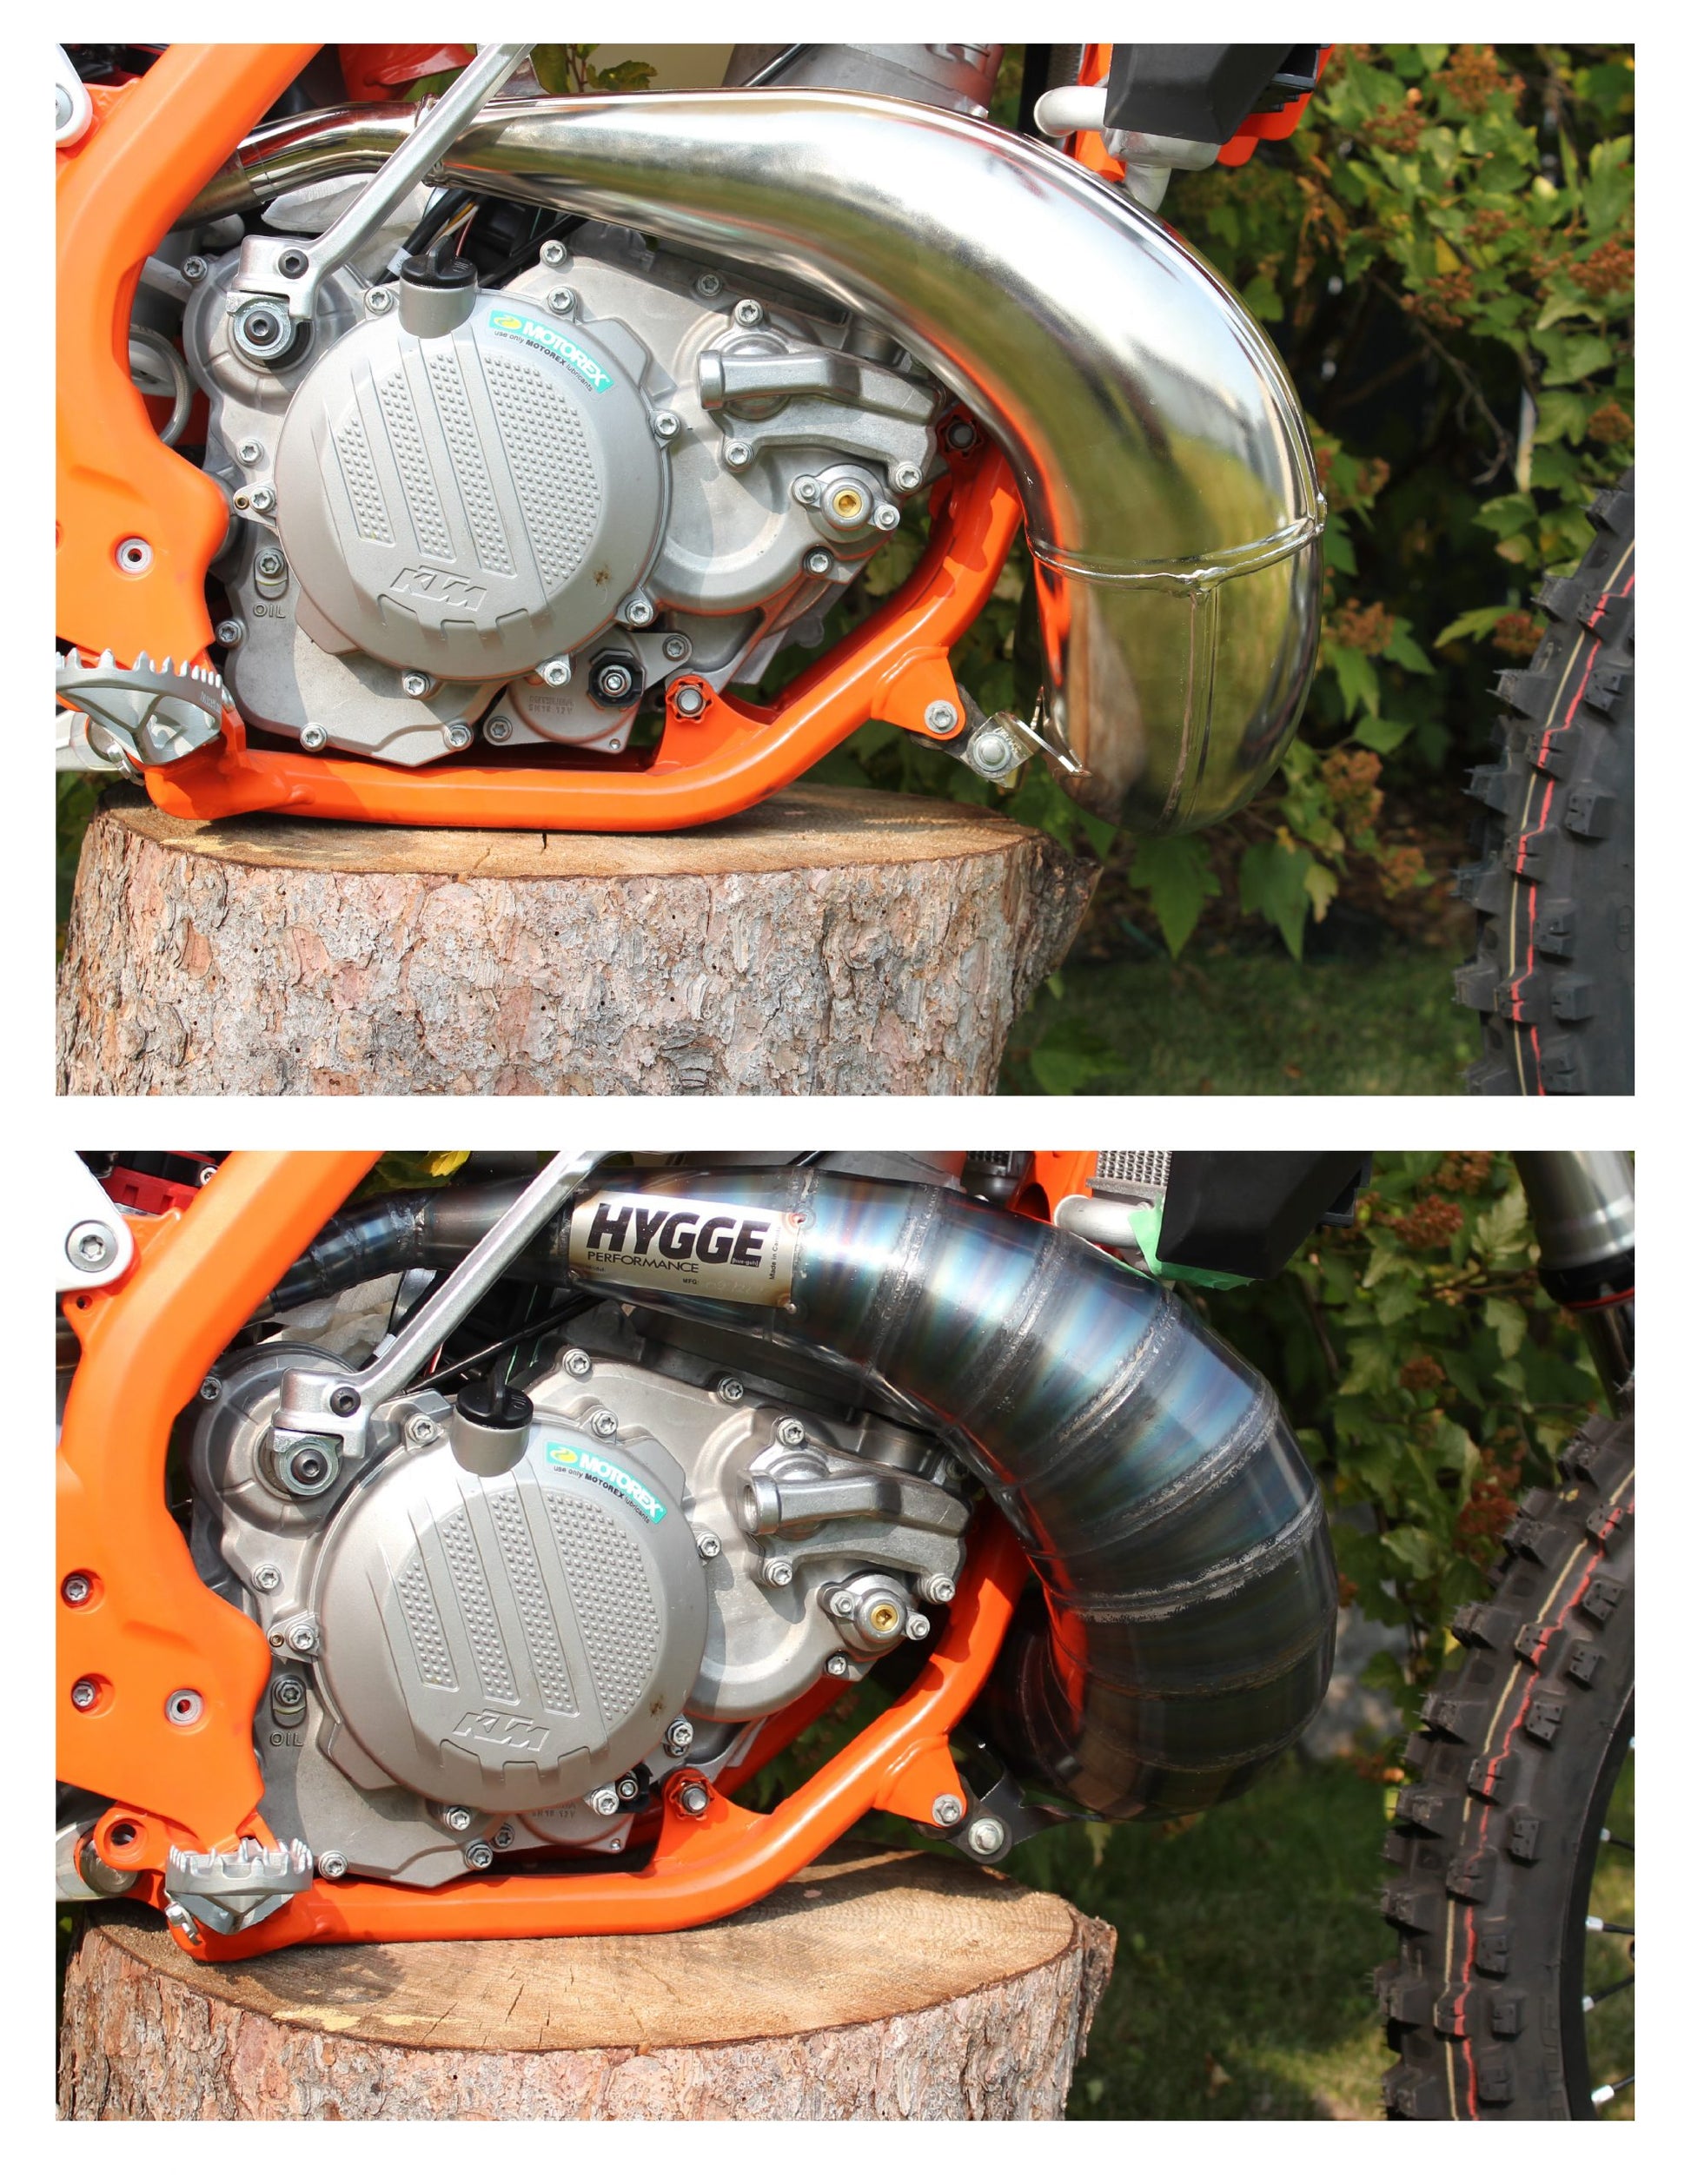 Hygge Performance KTM 300 high clearance expansion chamber